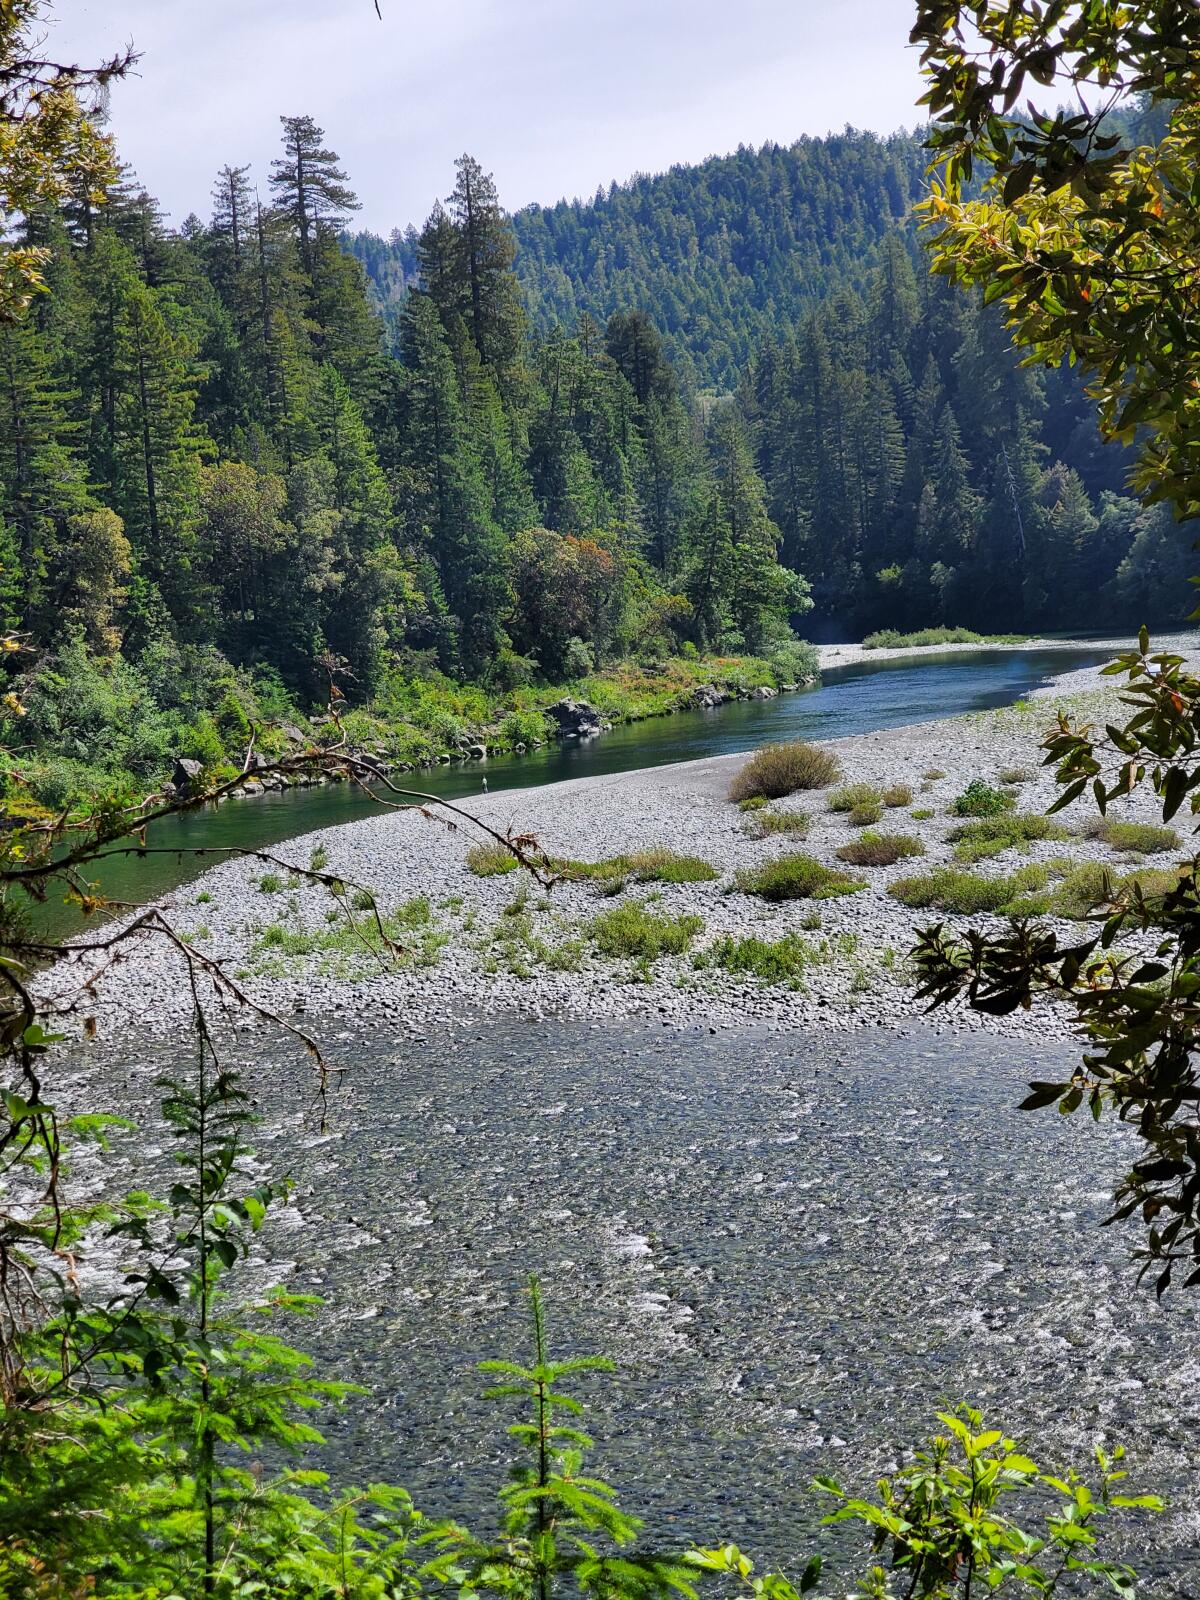 The Smith River in Jedediah Smith Redwoods State Park.